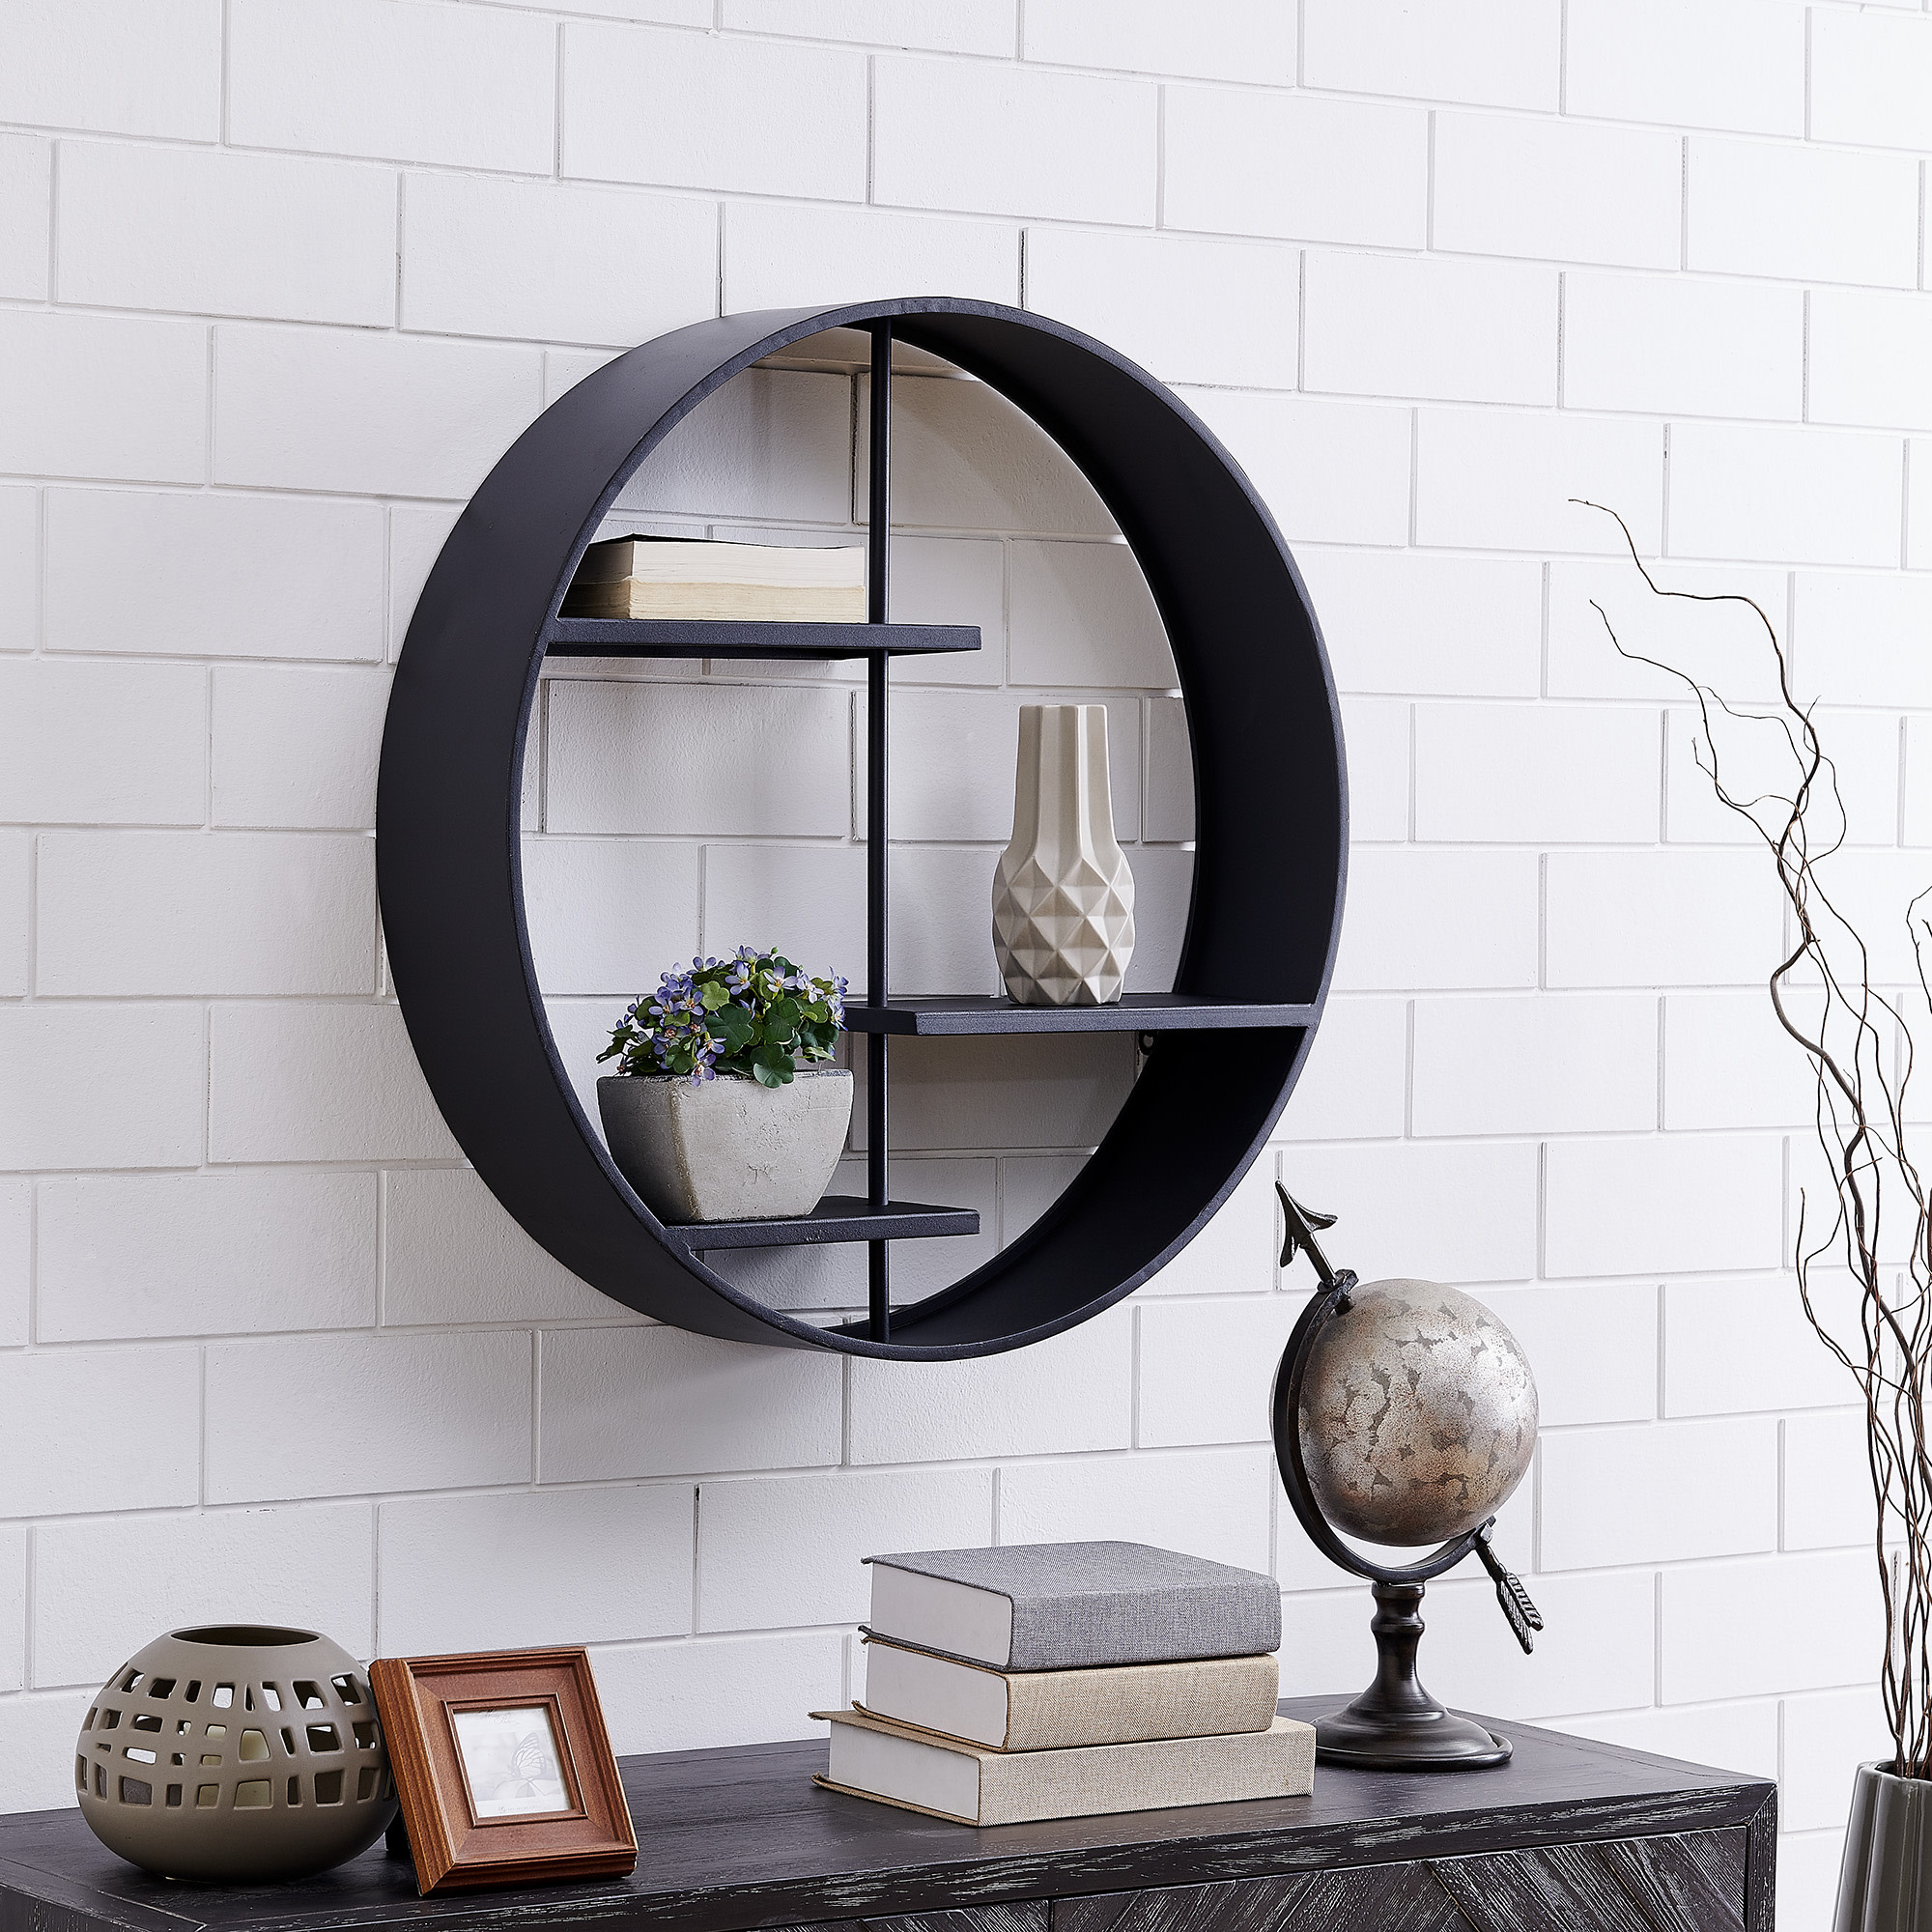 FirsTime & Co.® Brock Industrial Circular Shelf, Industrial, Painted, Round,Metal, 27 x 6 x 27 in - image 1 of 5